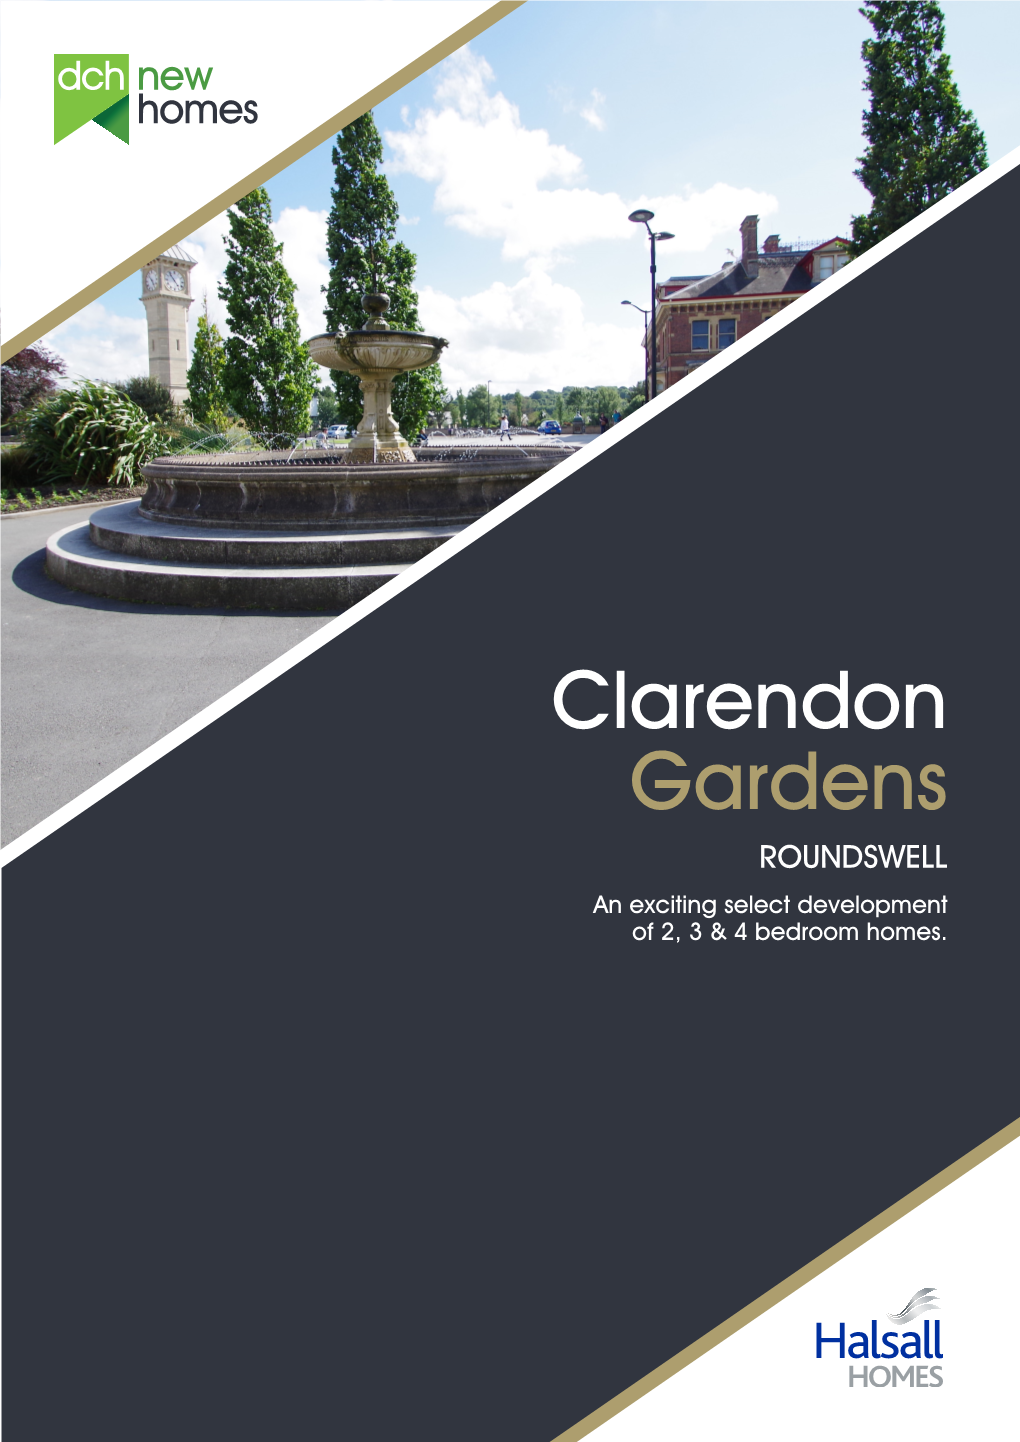 Clarendon Gardens ROUNDSWELL an Exciting Select Development of 2, 3 & 4 Bedroom Homes